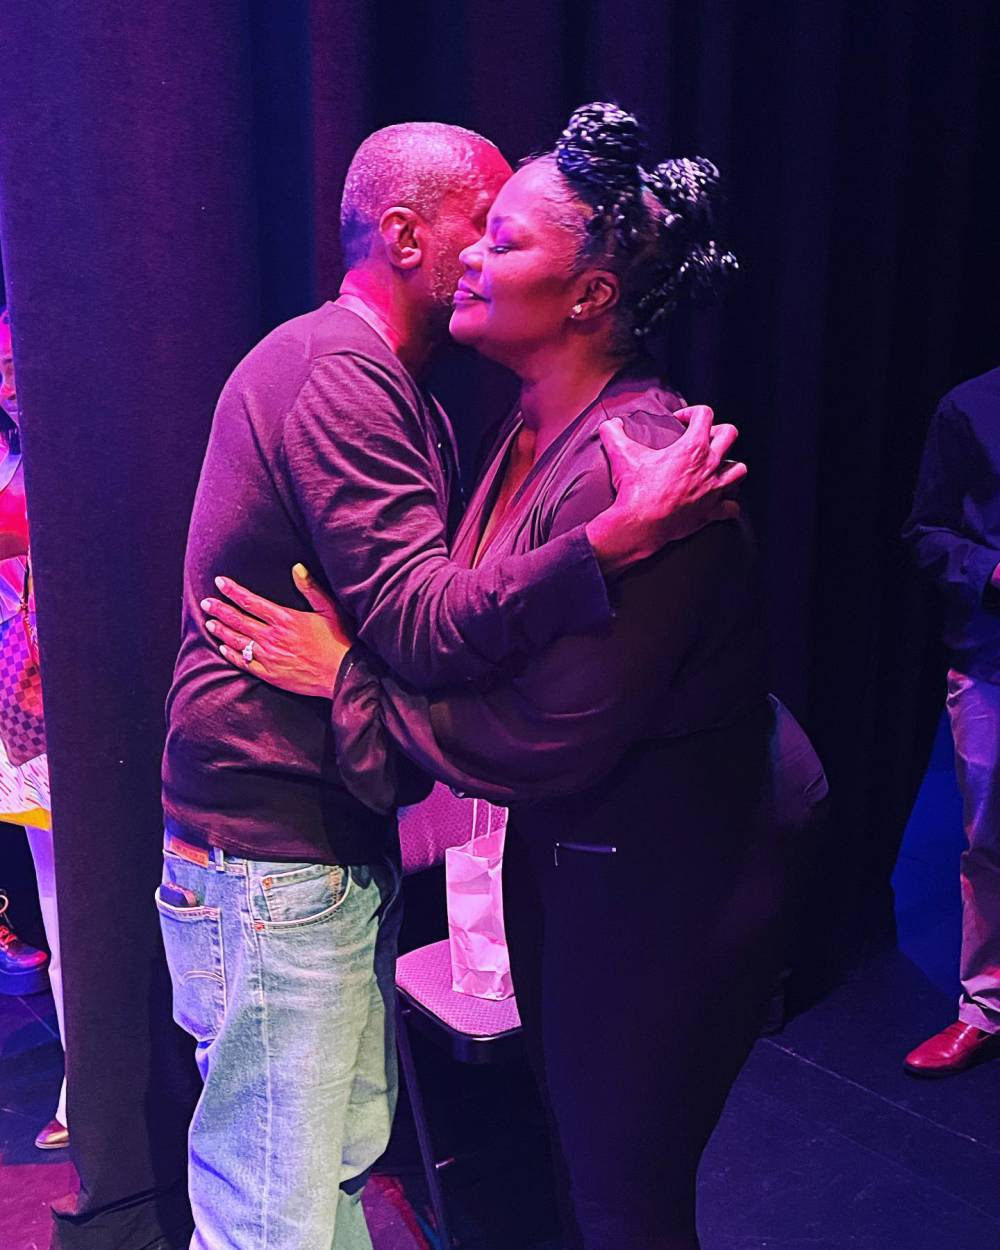 Lee Daniels Apologizes to Mo'Nique After 'Precious' Falling-Out: 'I Am So Sorry for Hurting You'